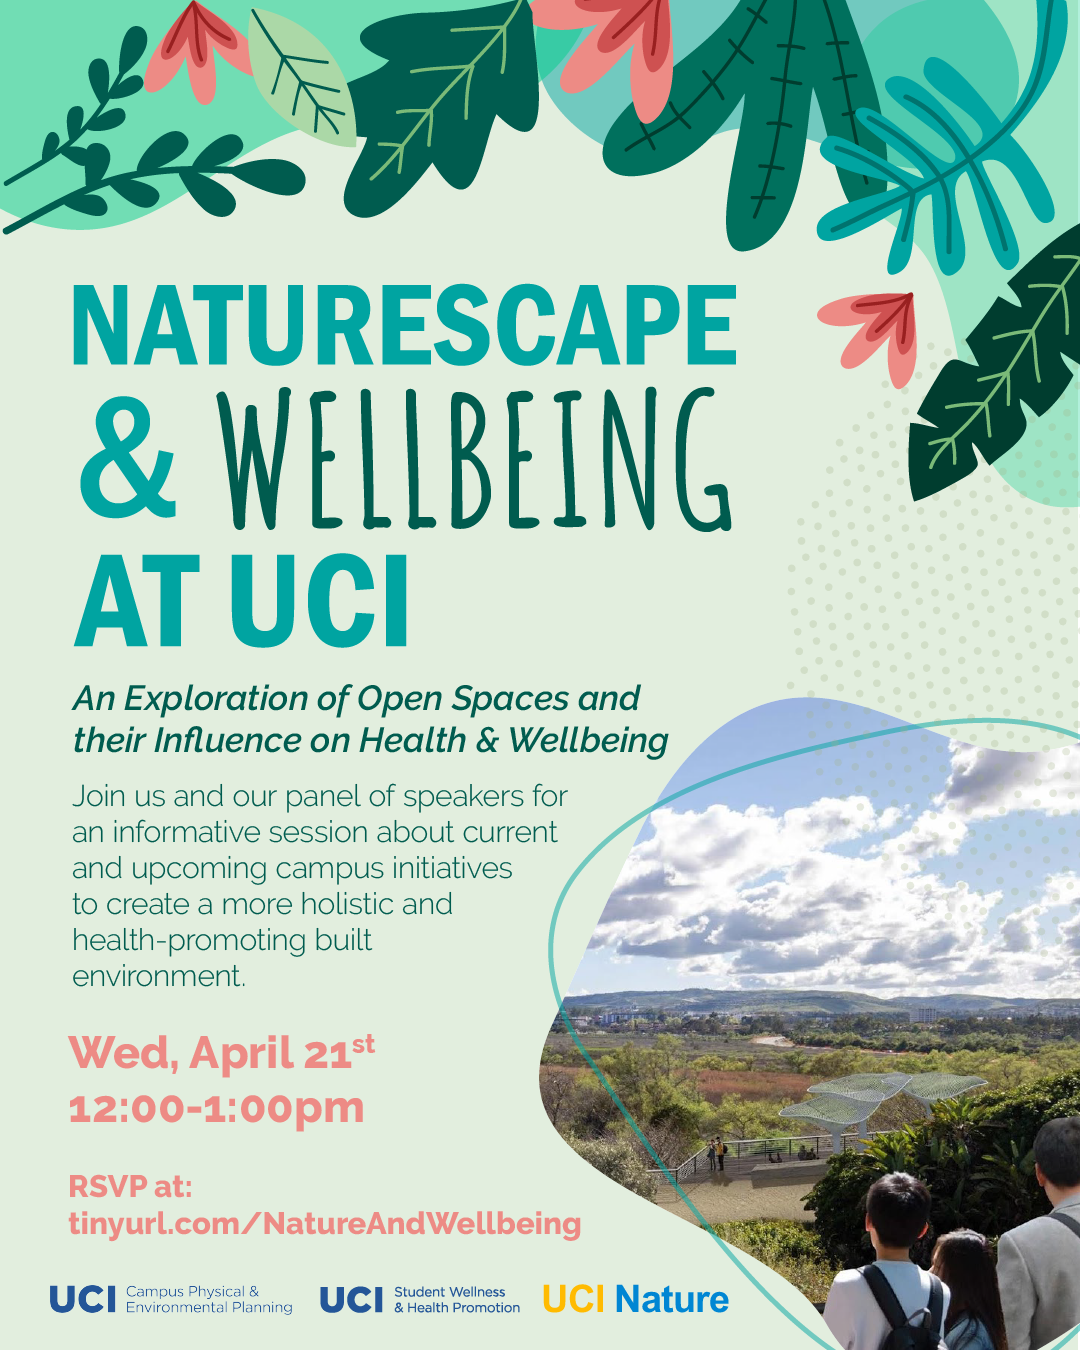 naturescape and wellbeing at UCI